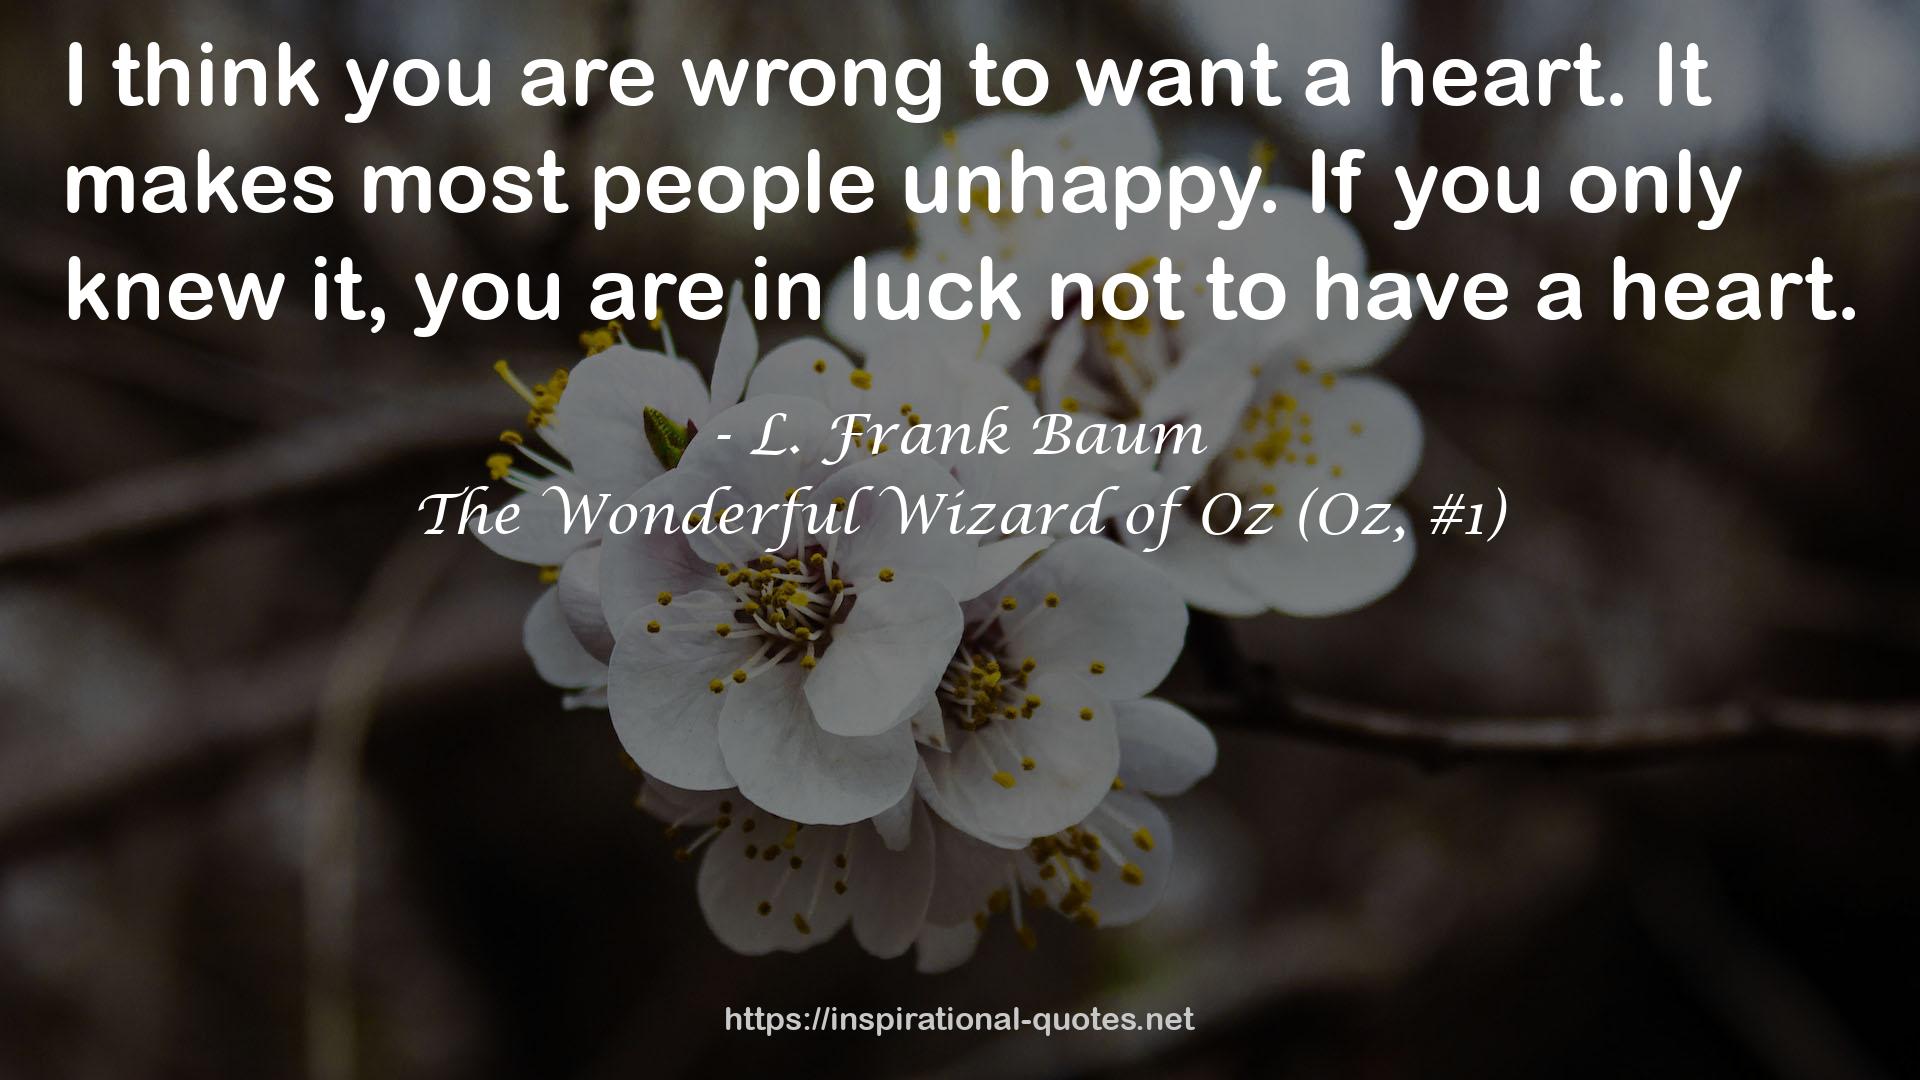 The Wonderful Wizard of Oz (Oz, #1) QUOTES